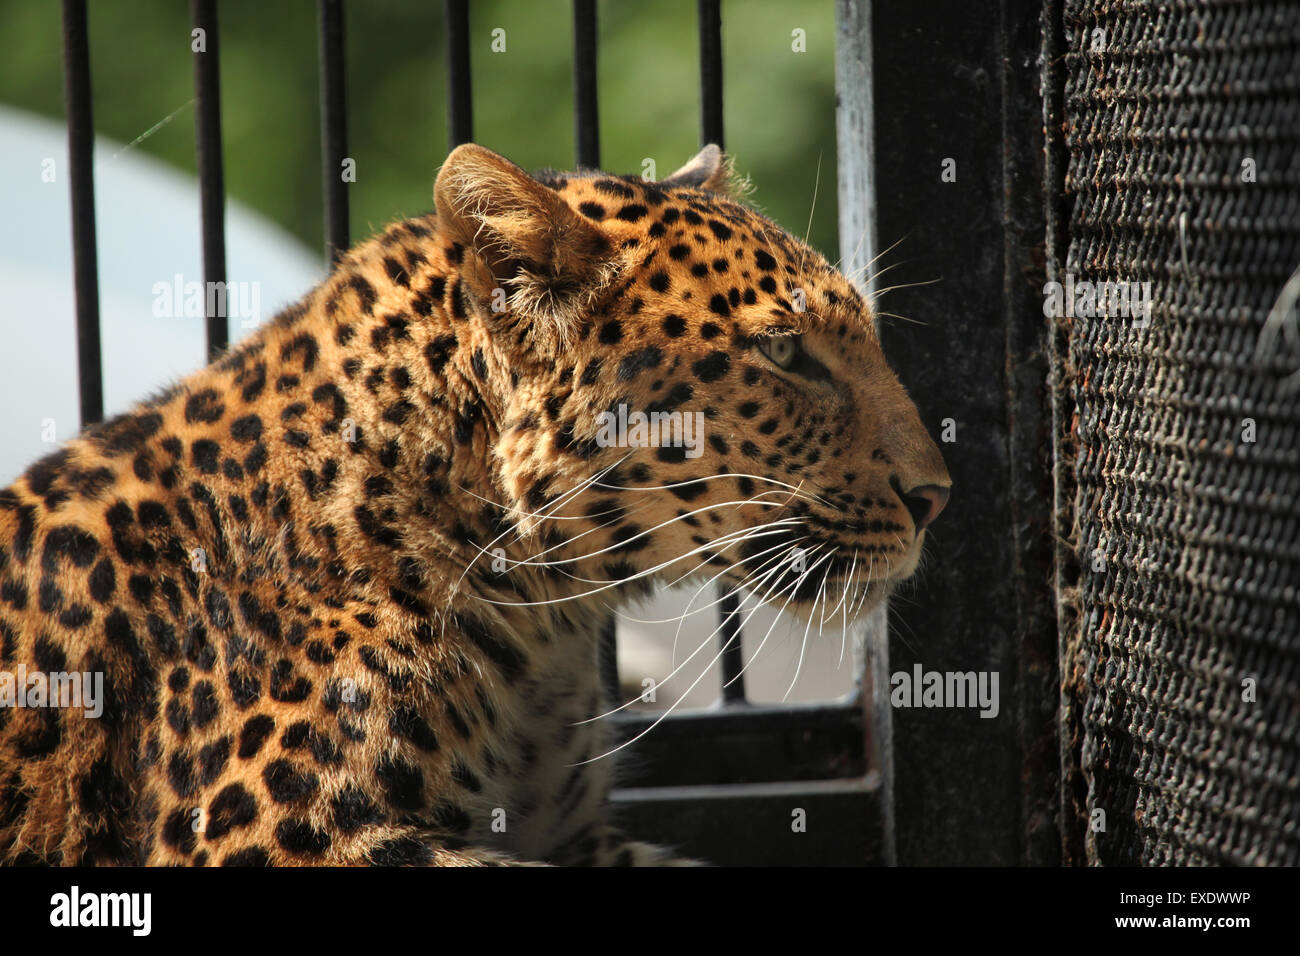 North-Chinese leopard (Panthera pardus japonensis) at Liberec Zoo in North Bohemia, Czech Republic. Stock Photo